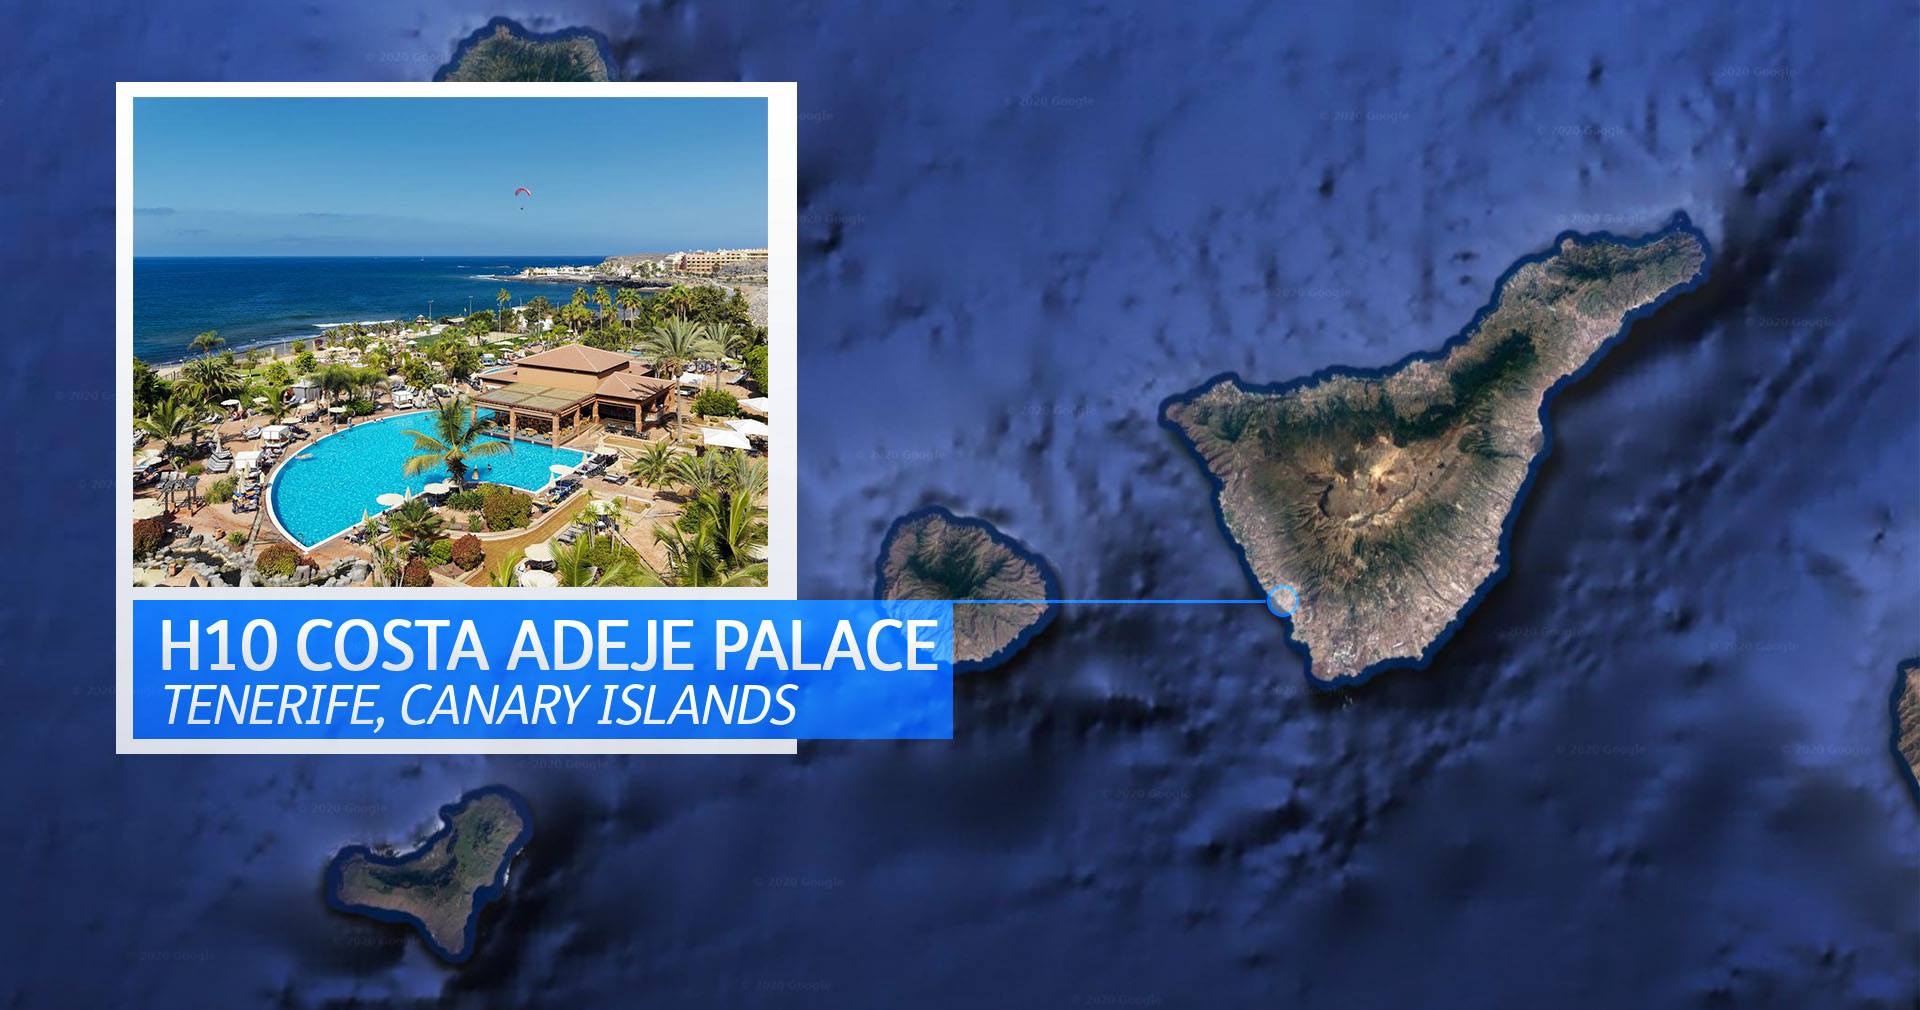  The four-star H10 Costa Adeje Palace went into lockdown.